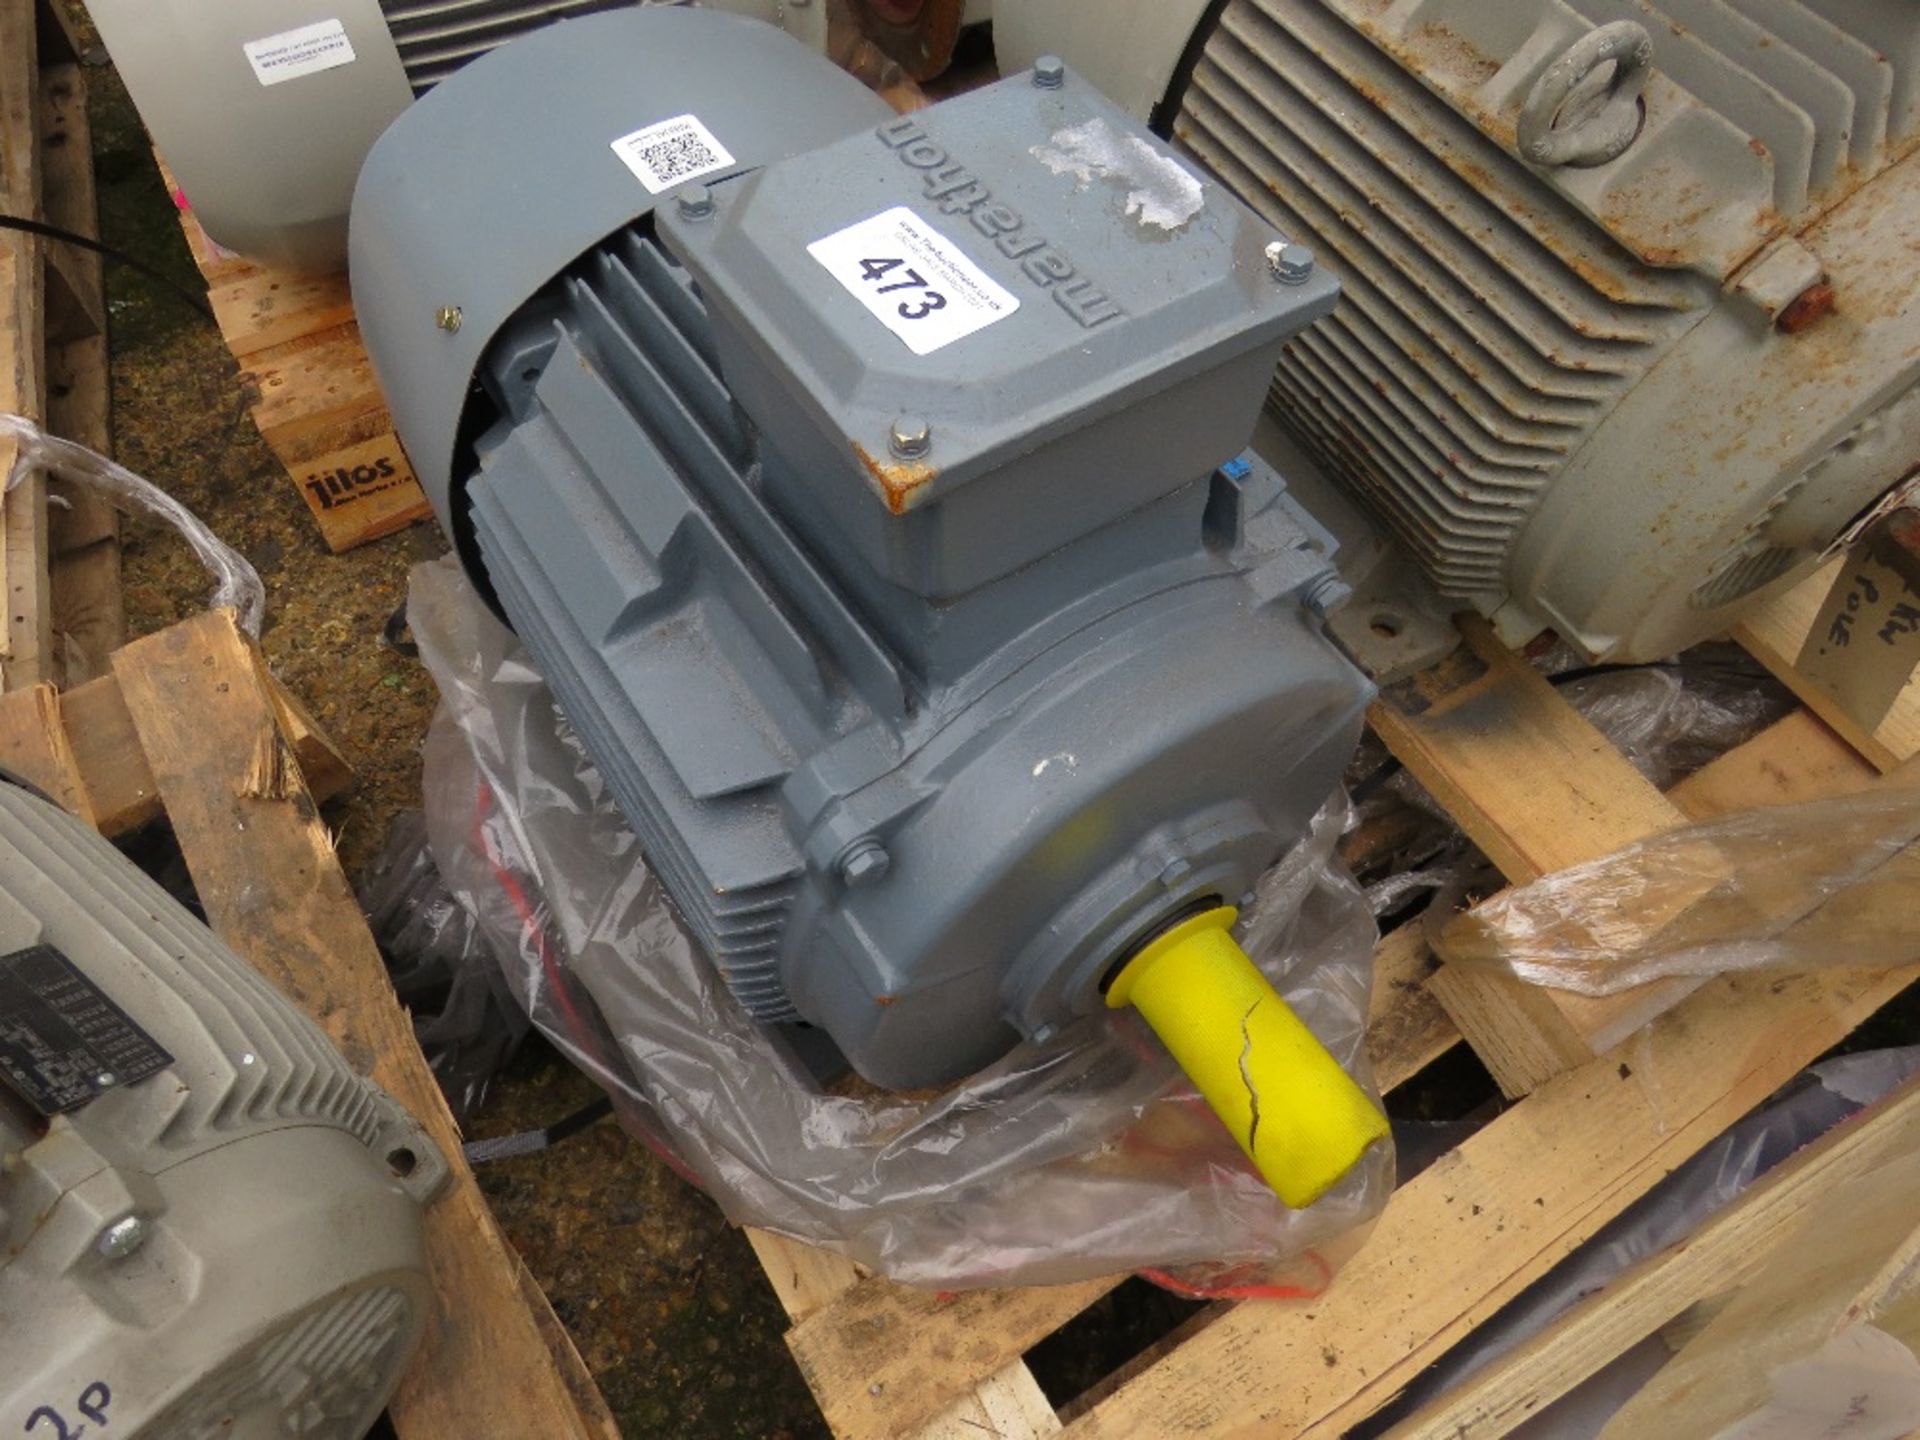 1 X INDUSTRIAL 22KW RATED ELECTRIC MOTOR, SOURCED FROM DEPOT CLEARANCE.